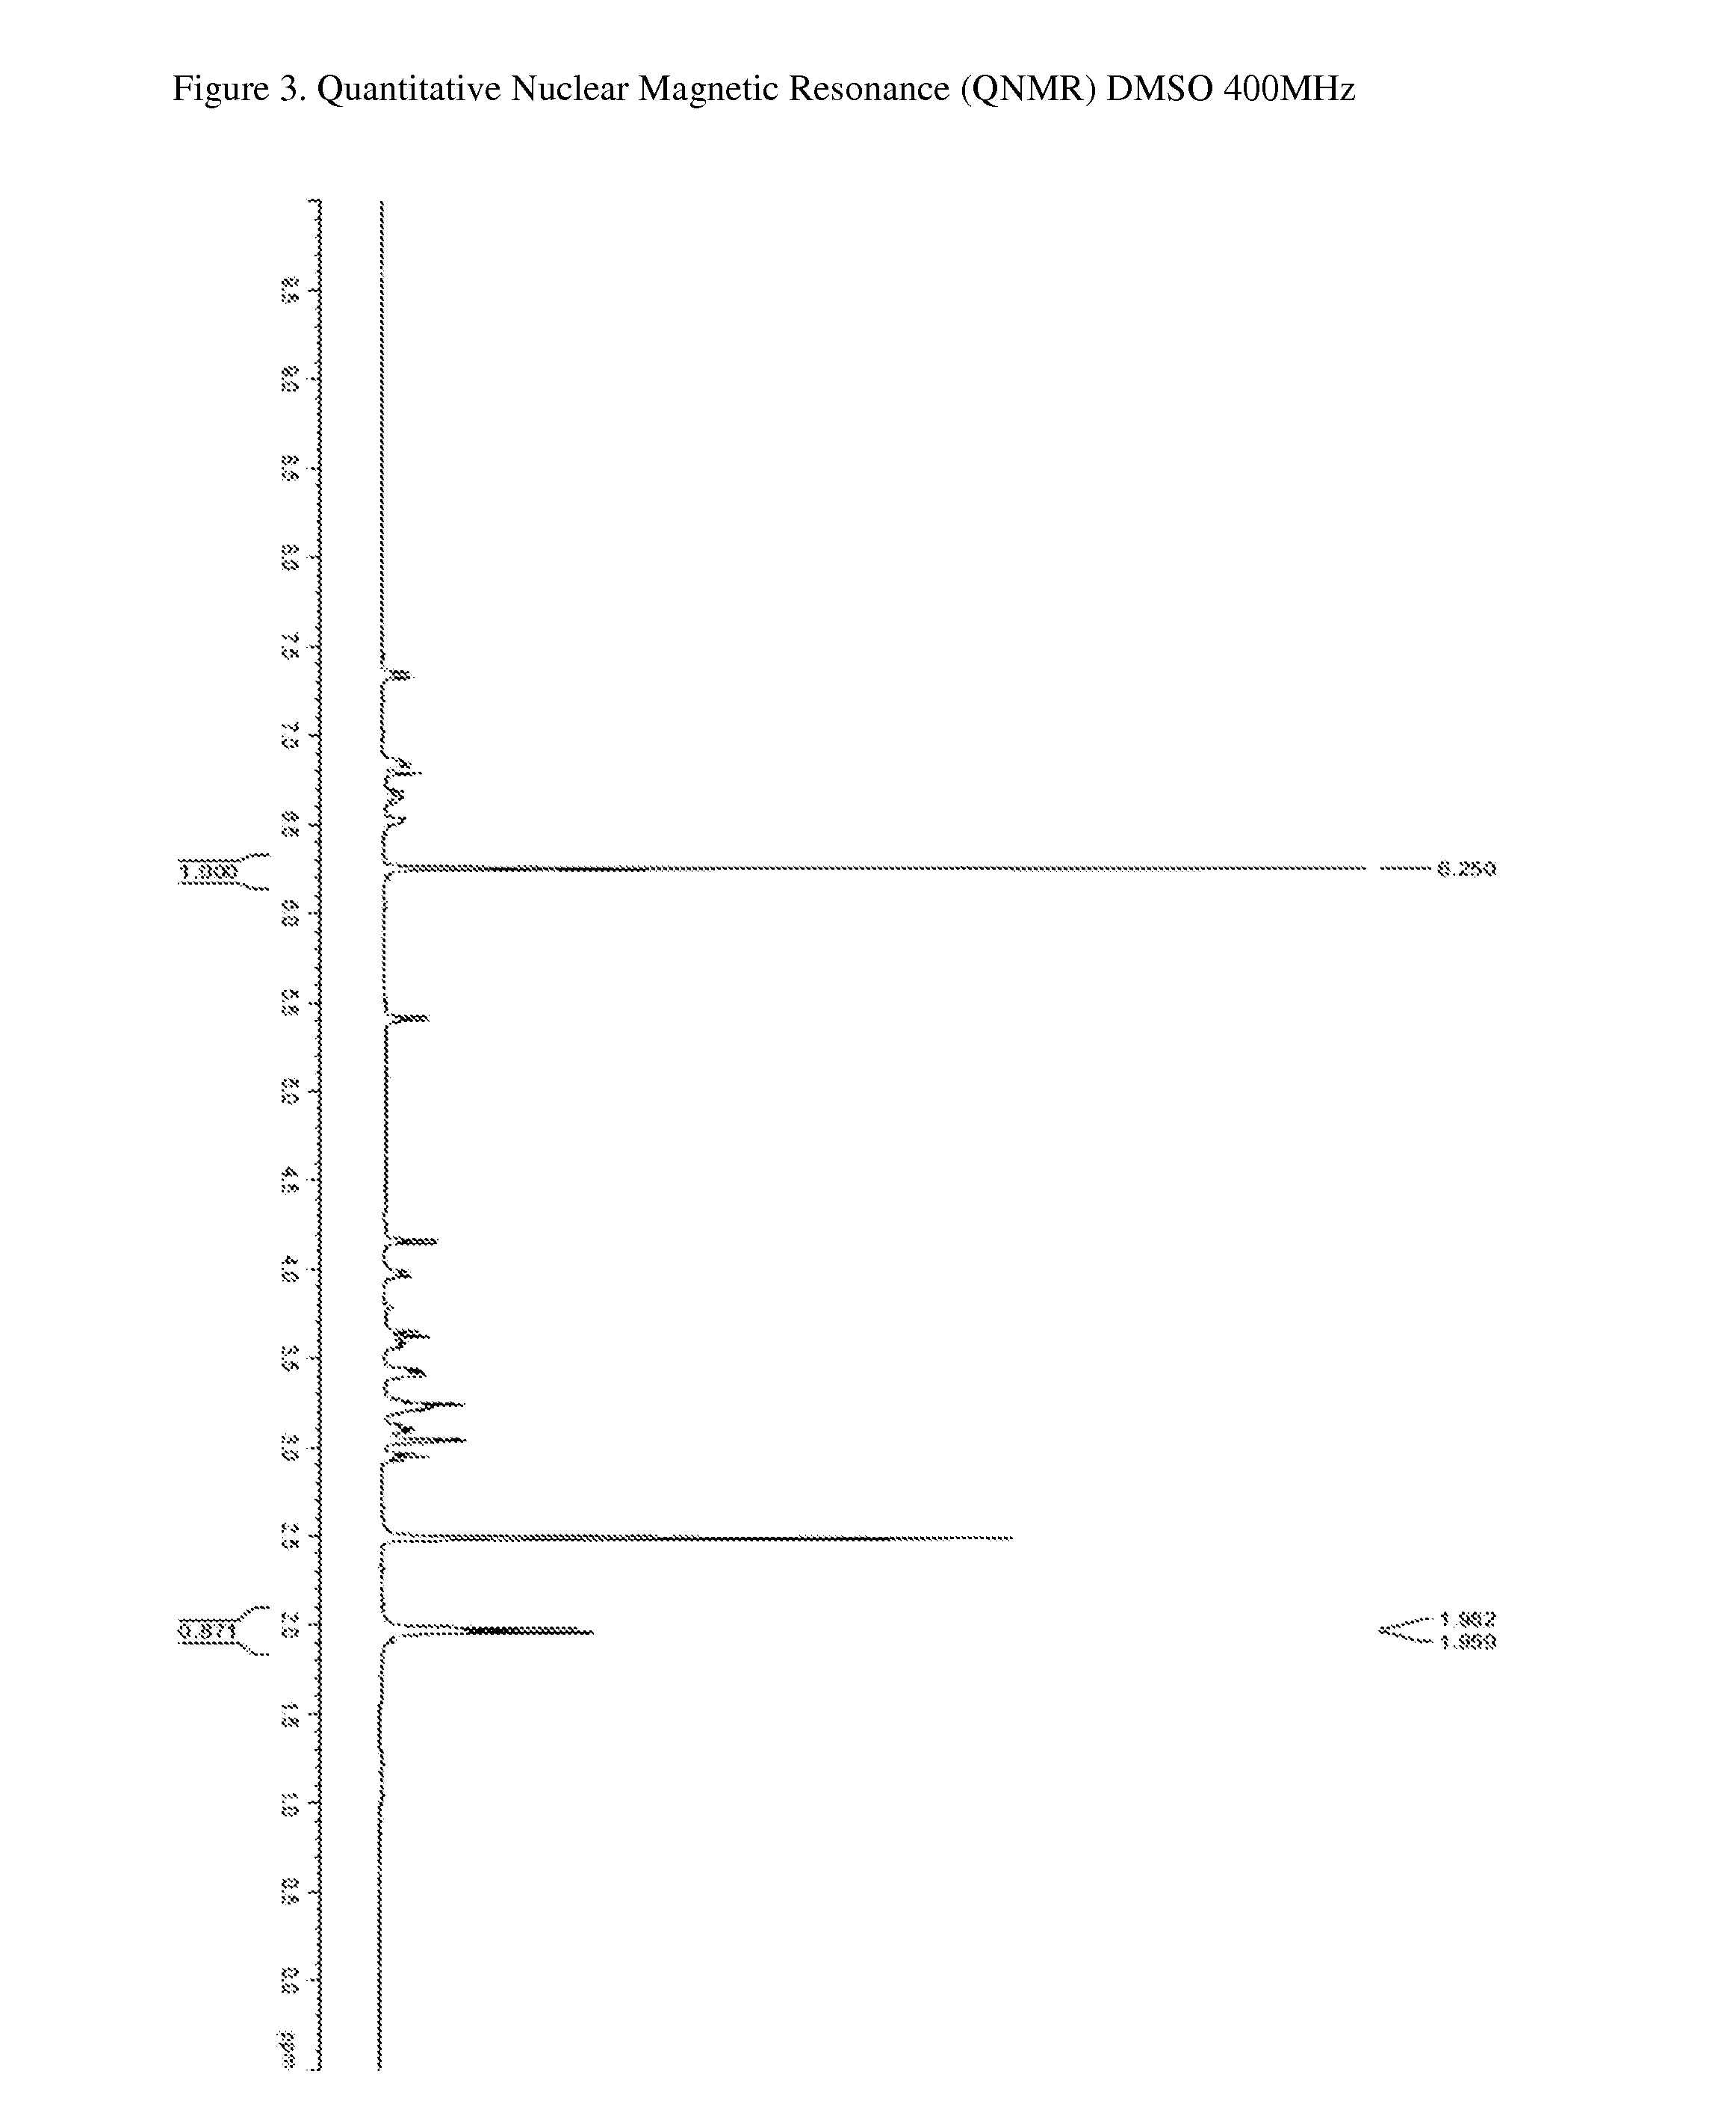 Compositions Containing Enriched Natural Crocin and/or Crocetin, and Their Therapeutic or Nutraceutical Uses